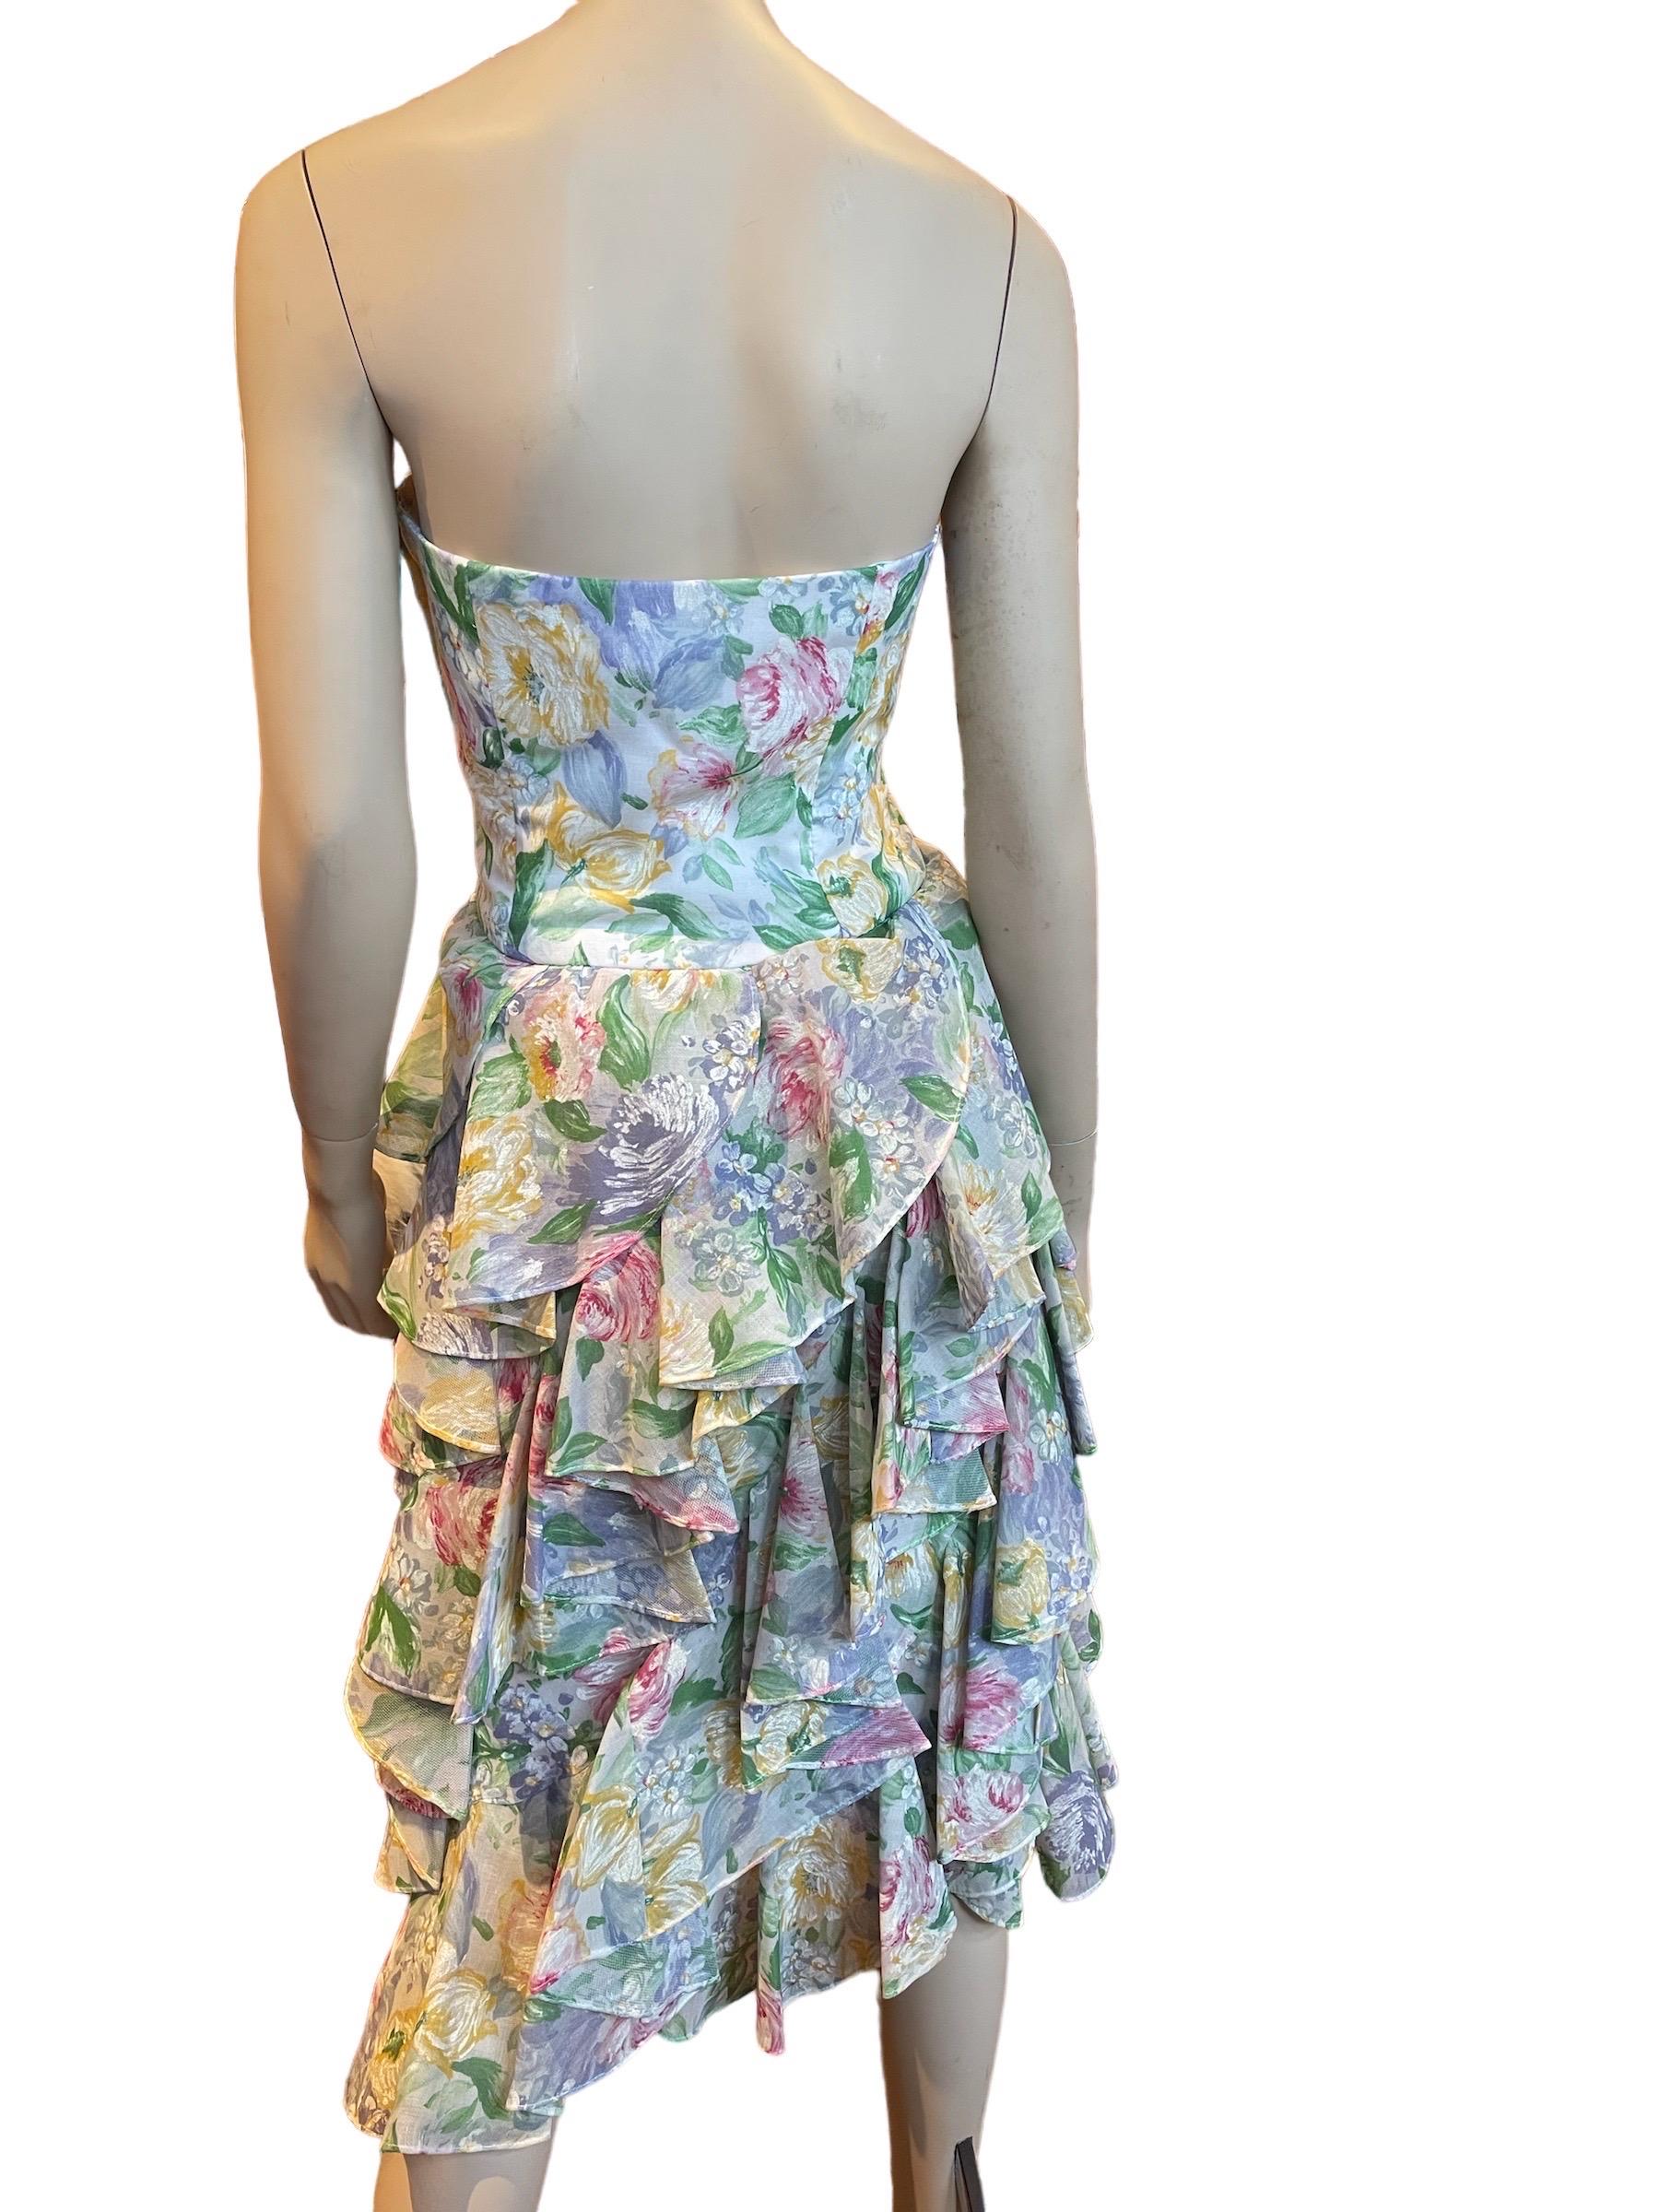 1980s Victor Costa Watercolor Floral Strapless Dress with Ruffled Skirt  In Good Condition For Sale In Greenport, NY